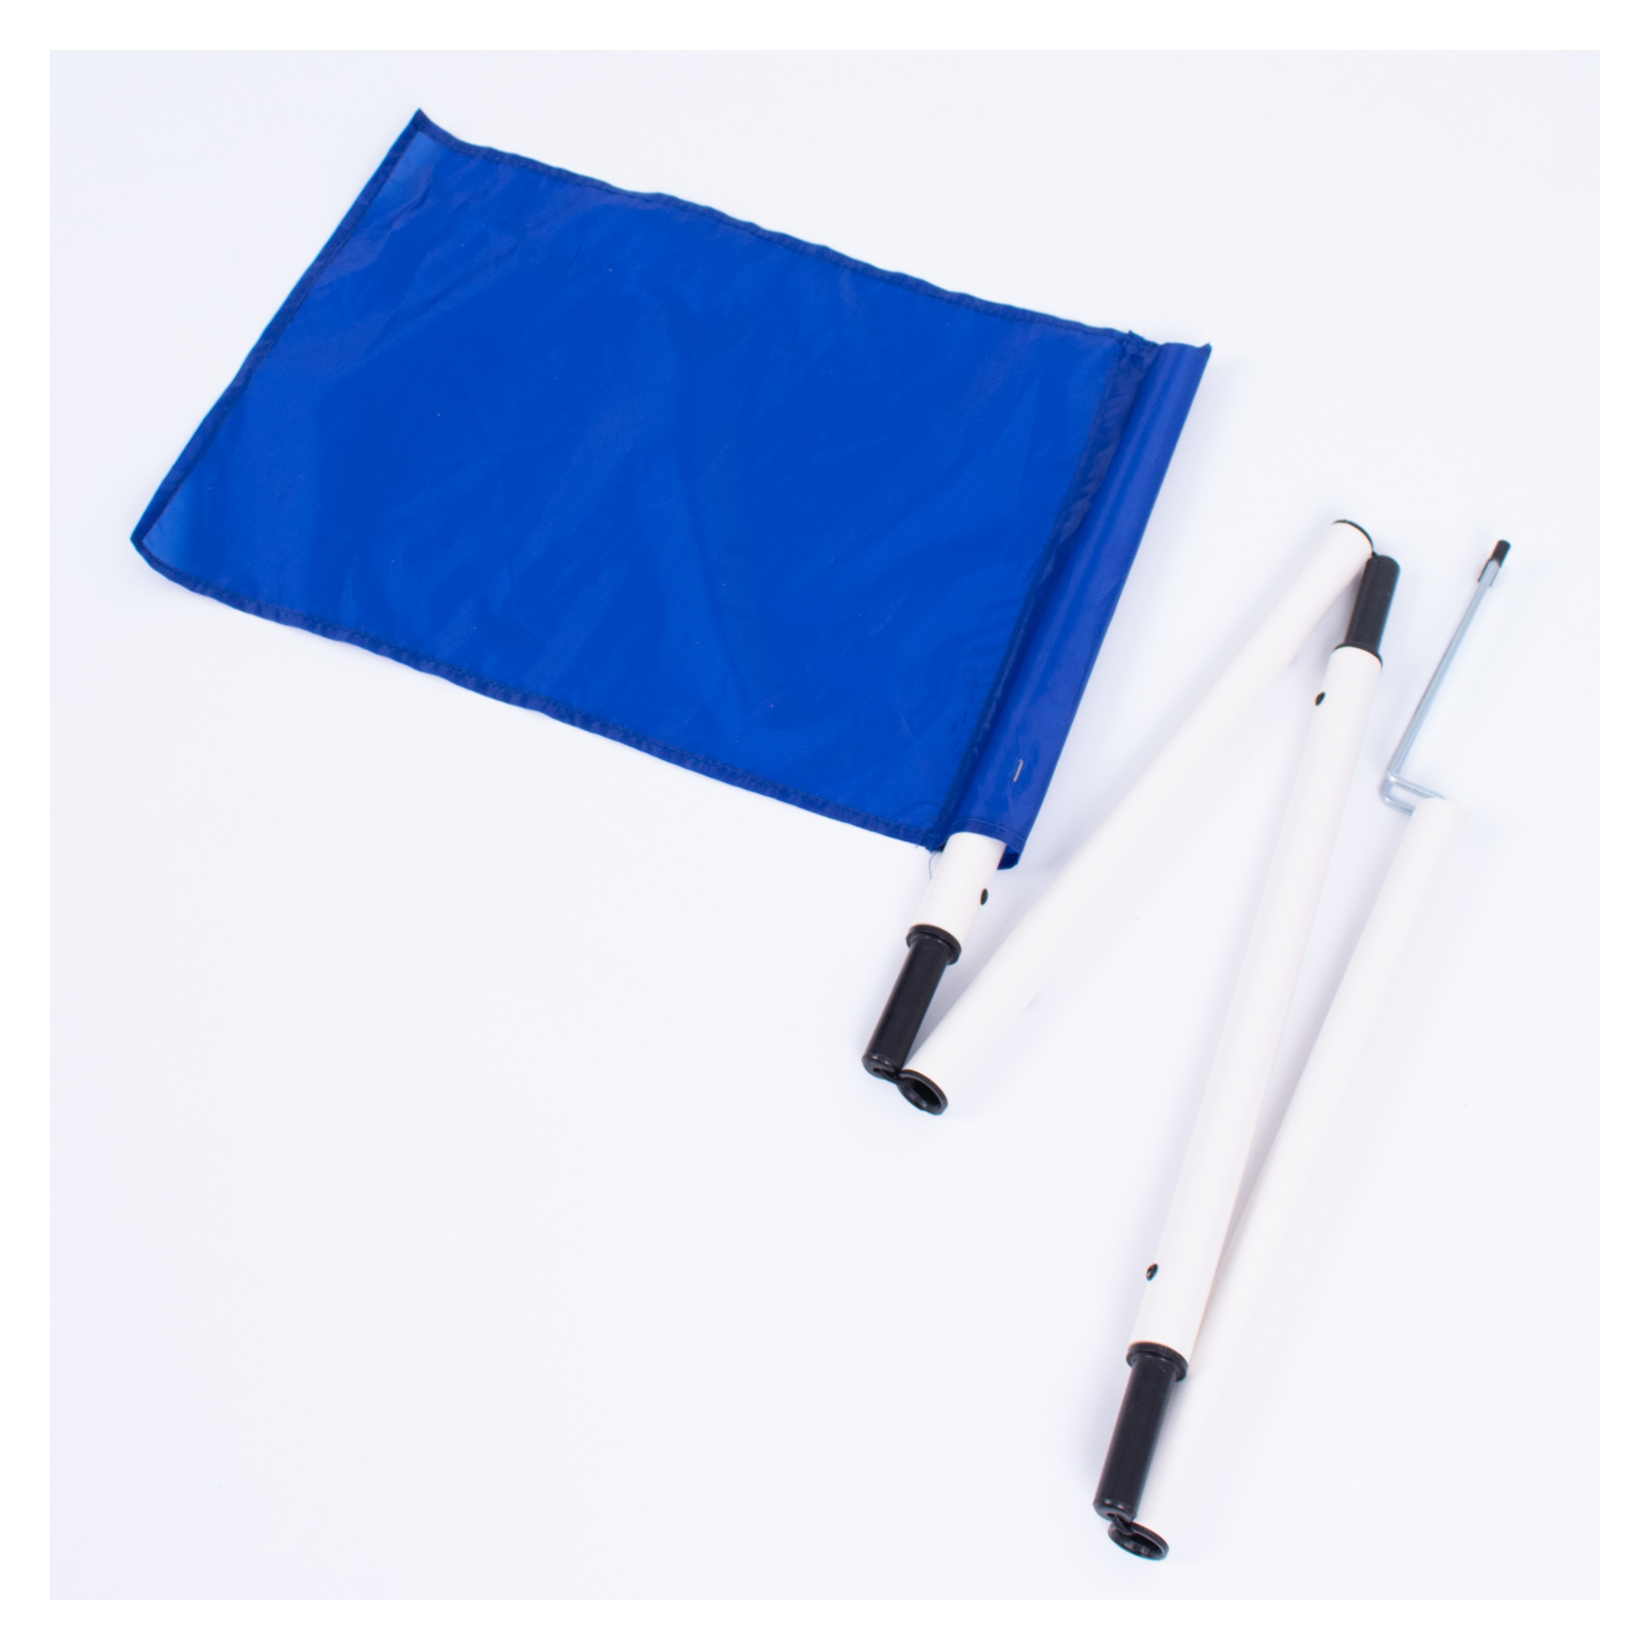 Collapsible corner flags (Set of 4) with carry bag